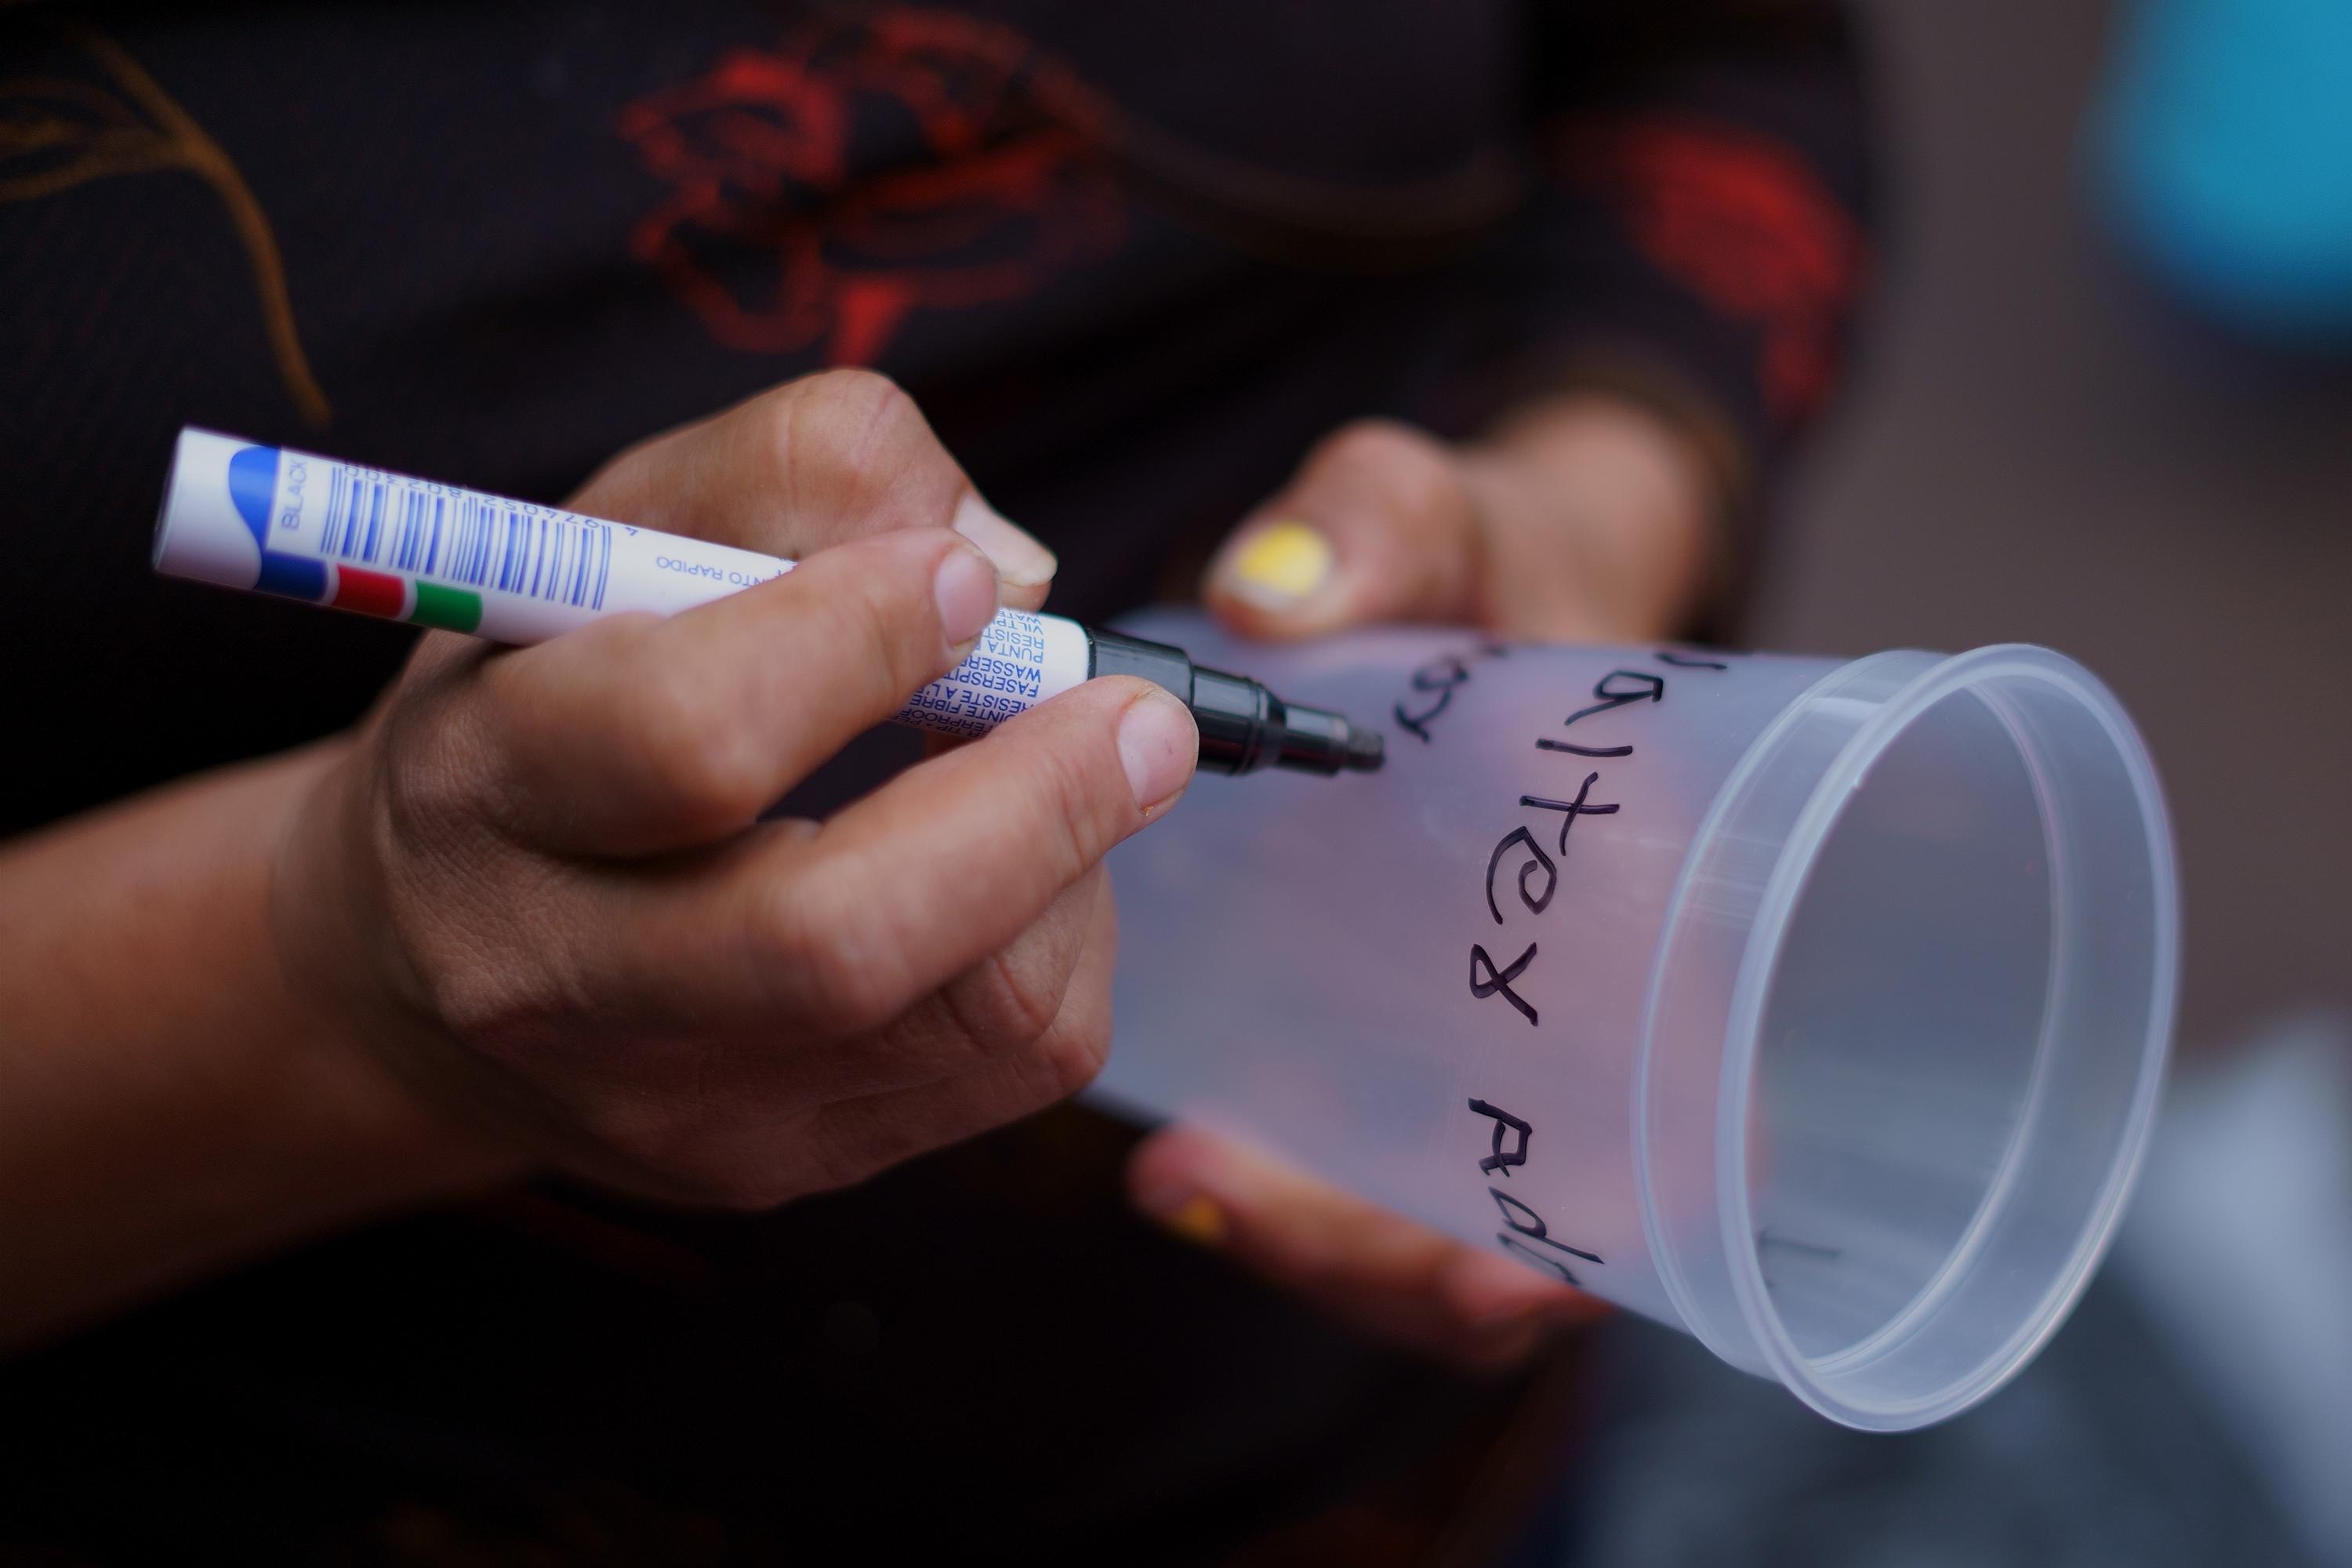 María Moreno writes the name of her only son on a plastic cup. She carries her own marker, so she doesn’t have to pay the $1.00 fee to rent one. María spent $30 on the last package she delivered to Izalco Prison for her 20-year-old son, arrested on May 17 in Santa Ana. María earns a living selling breakfast in her neighborhood, but she had to shut down her business, which is her only income, so she could travel to the prison. María spends about $4.00 on bus fare each time she travels to the prison.